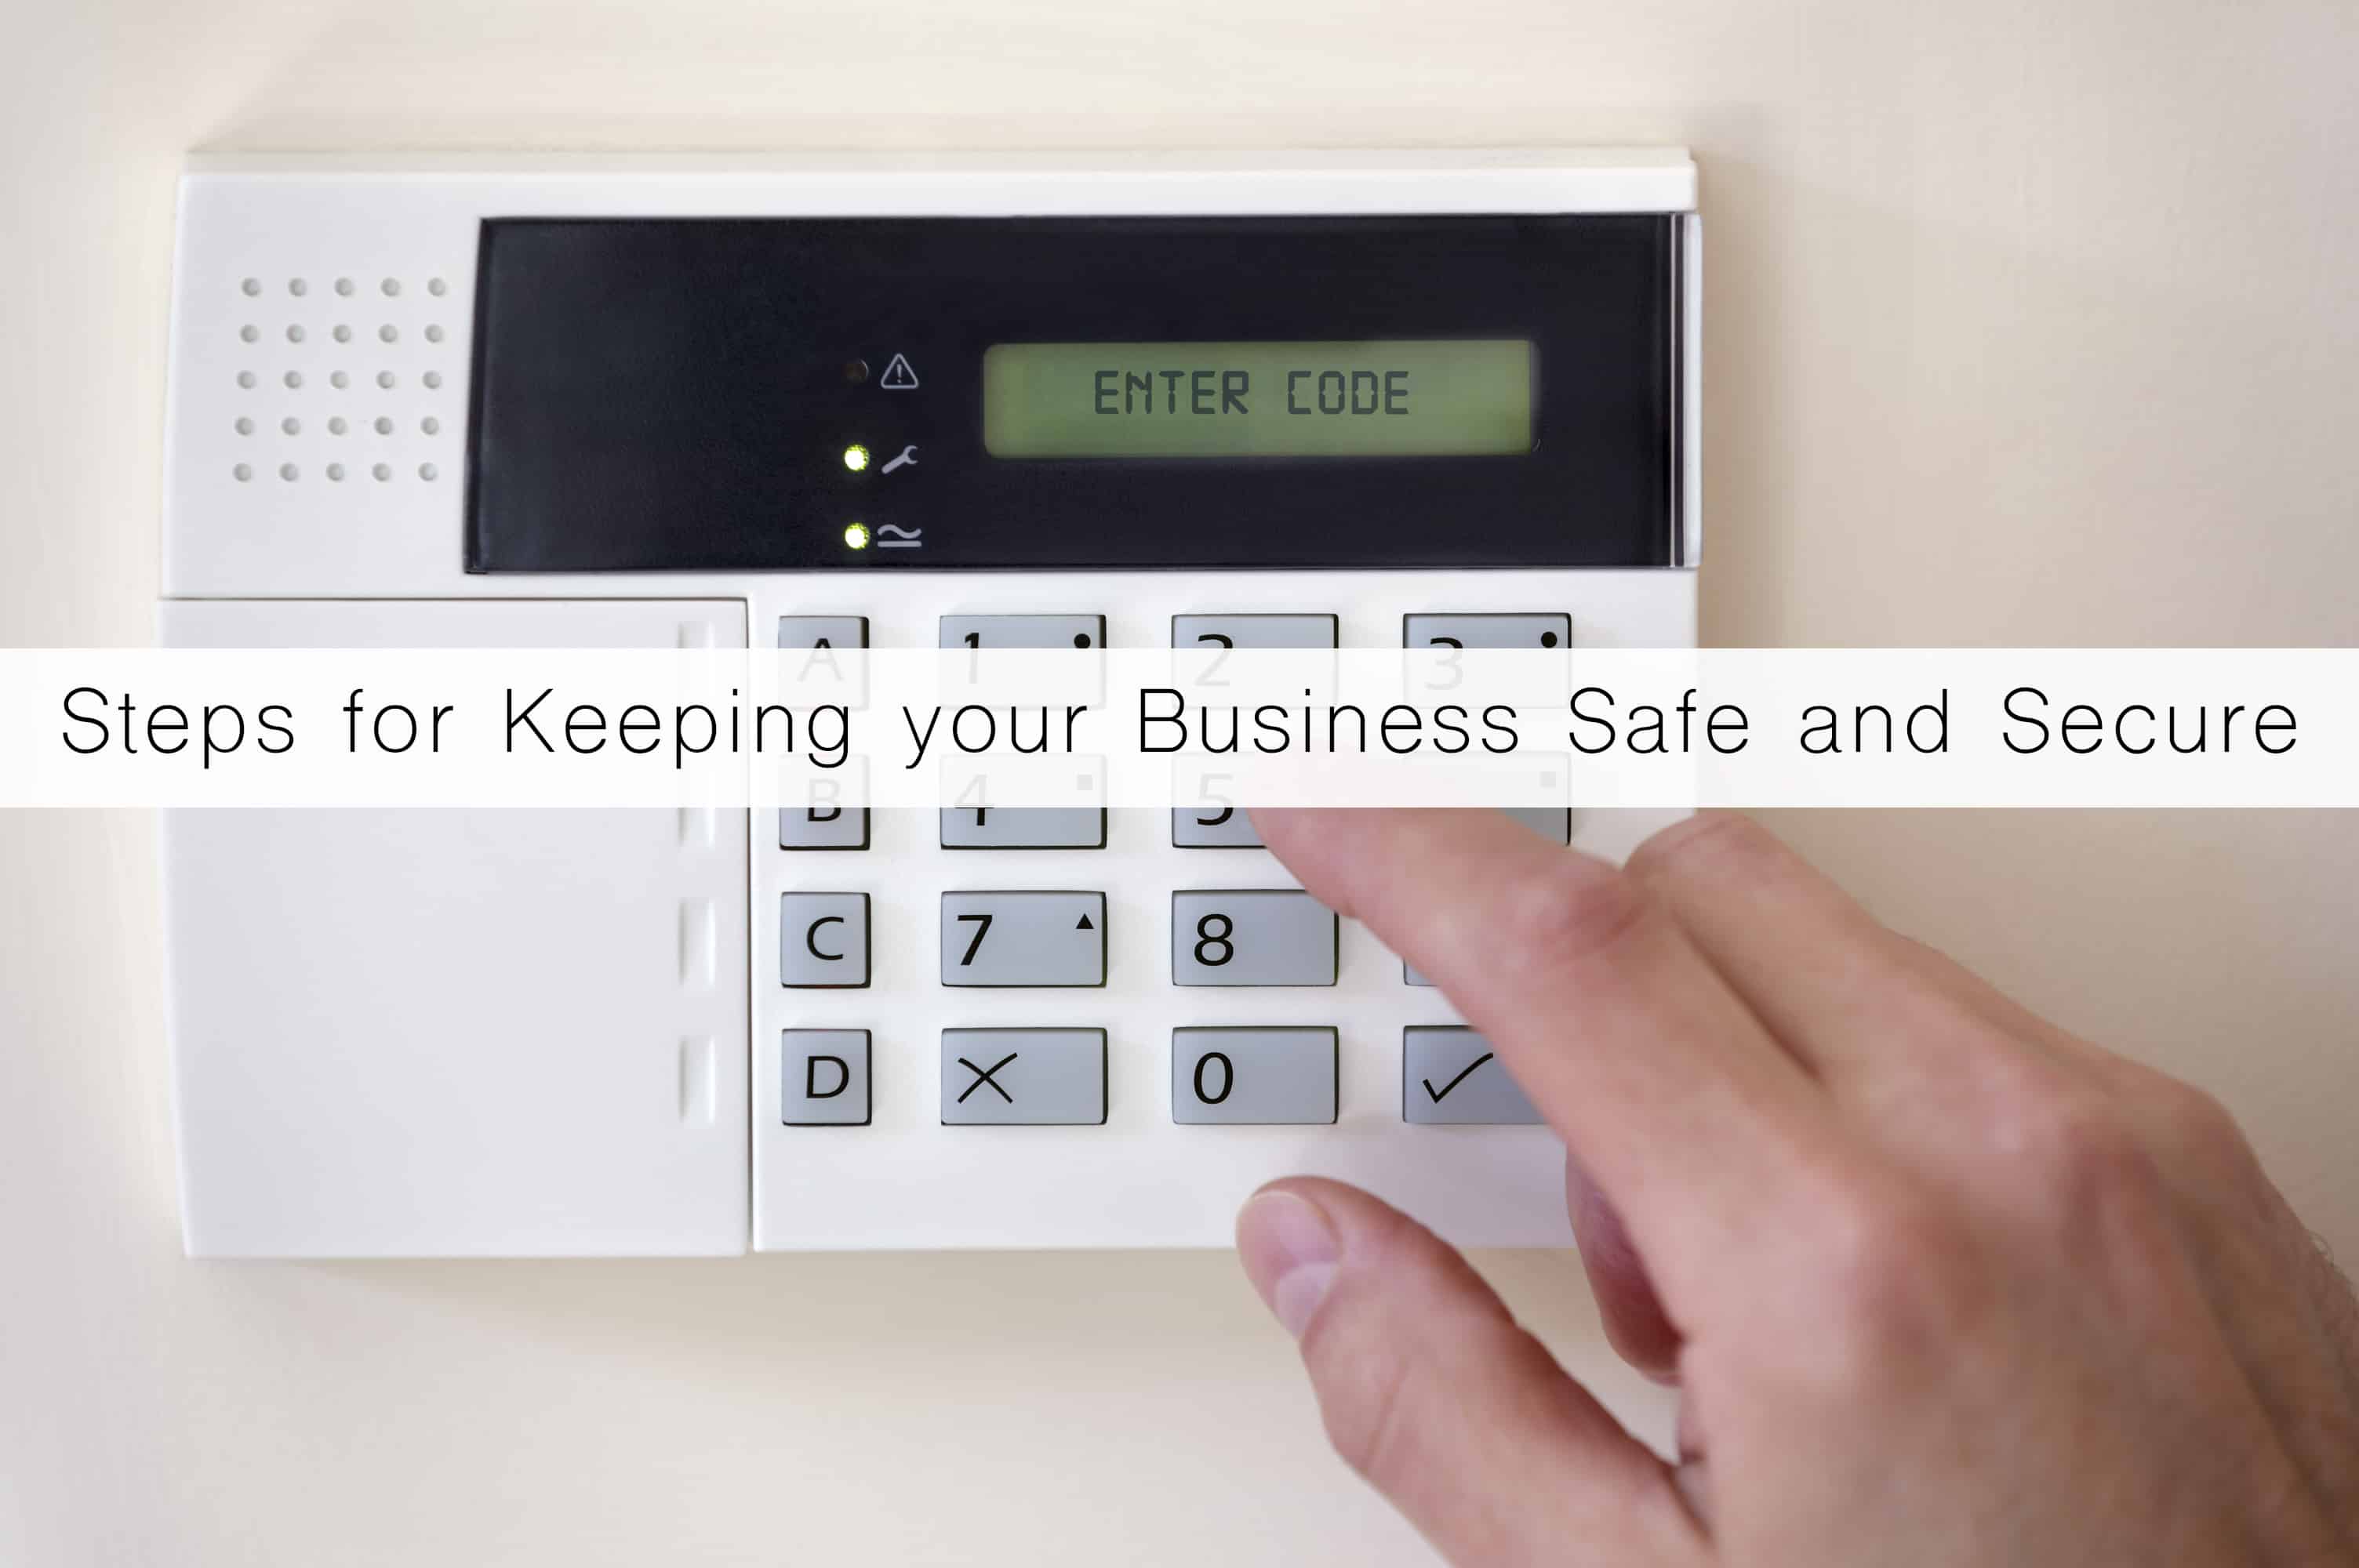 Steps for Keeping your Business Safe and Secure